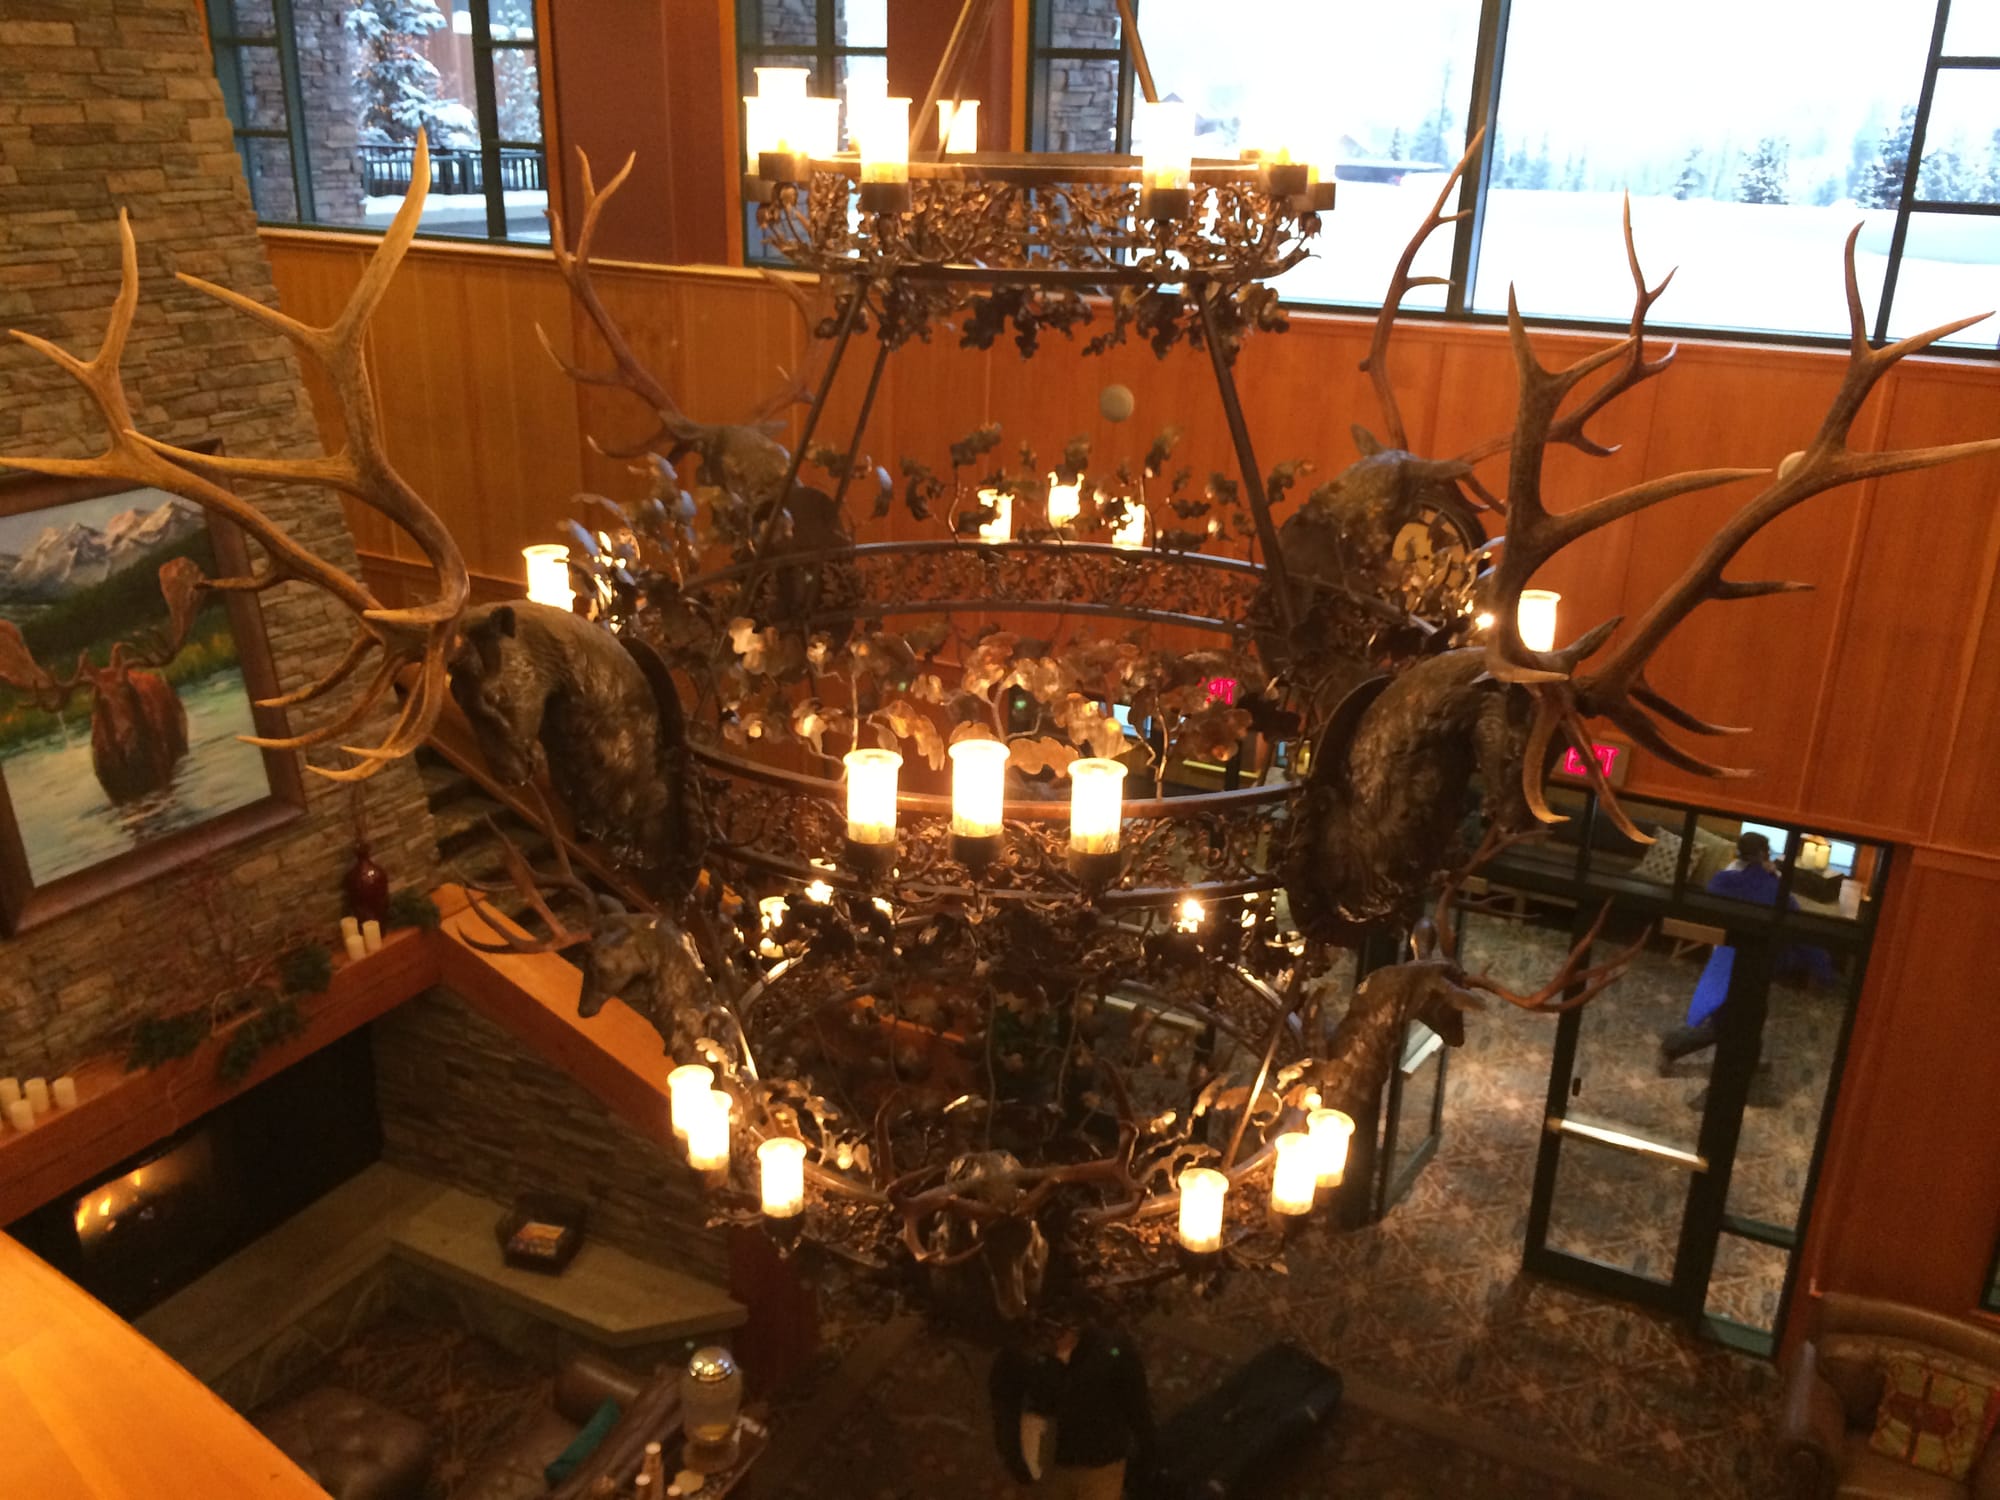 Photo by Author — chandelier at the Summit Hotel, Big Sky, Montana